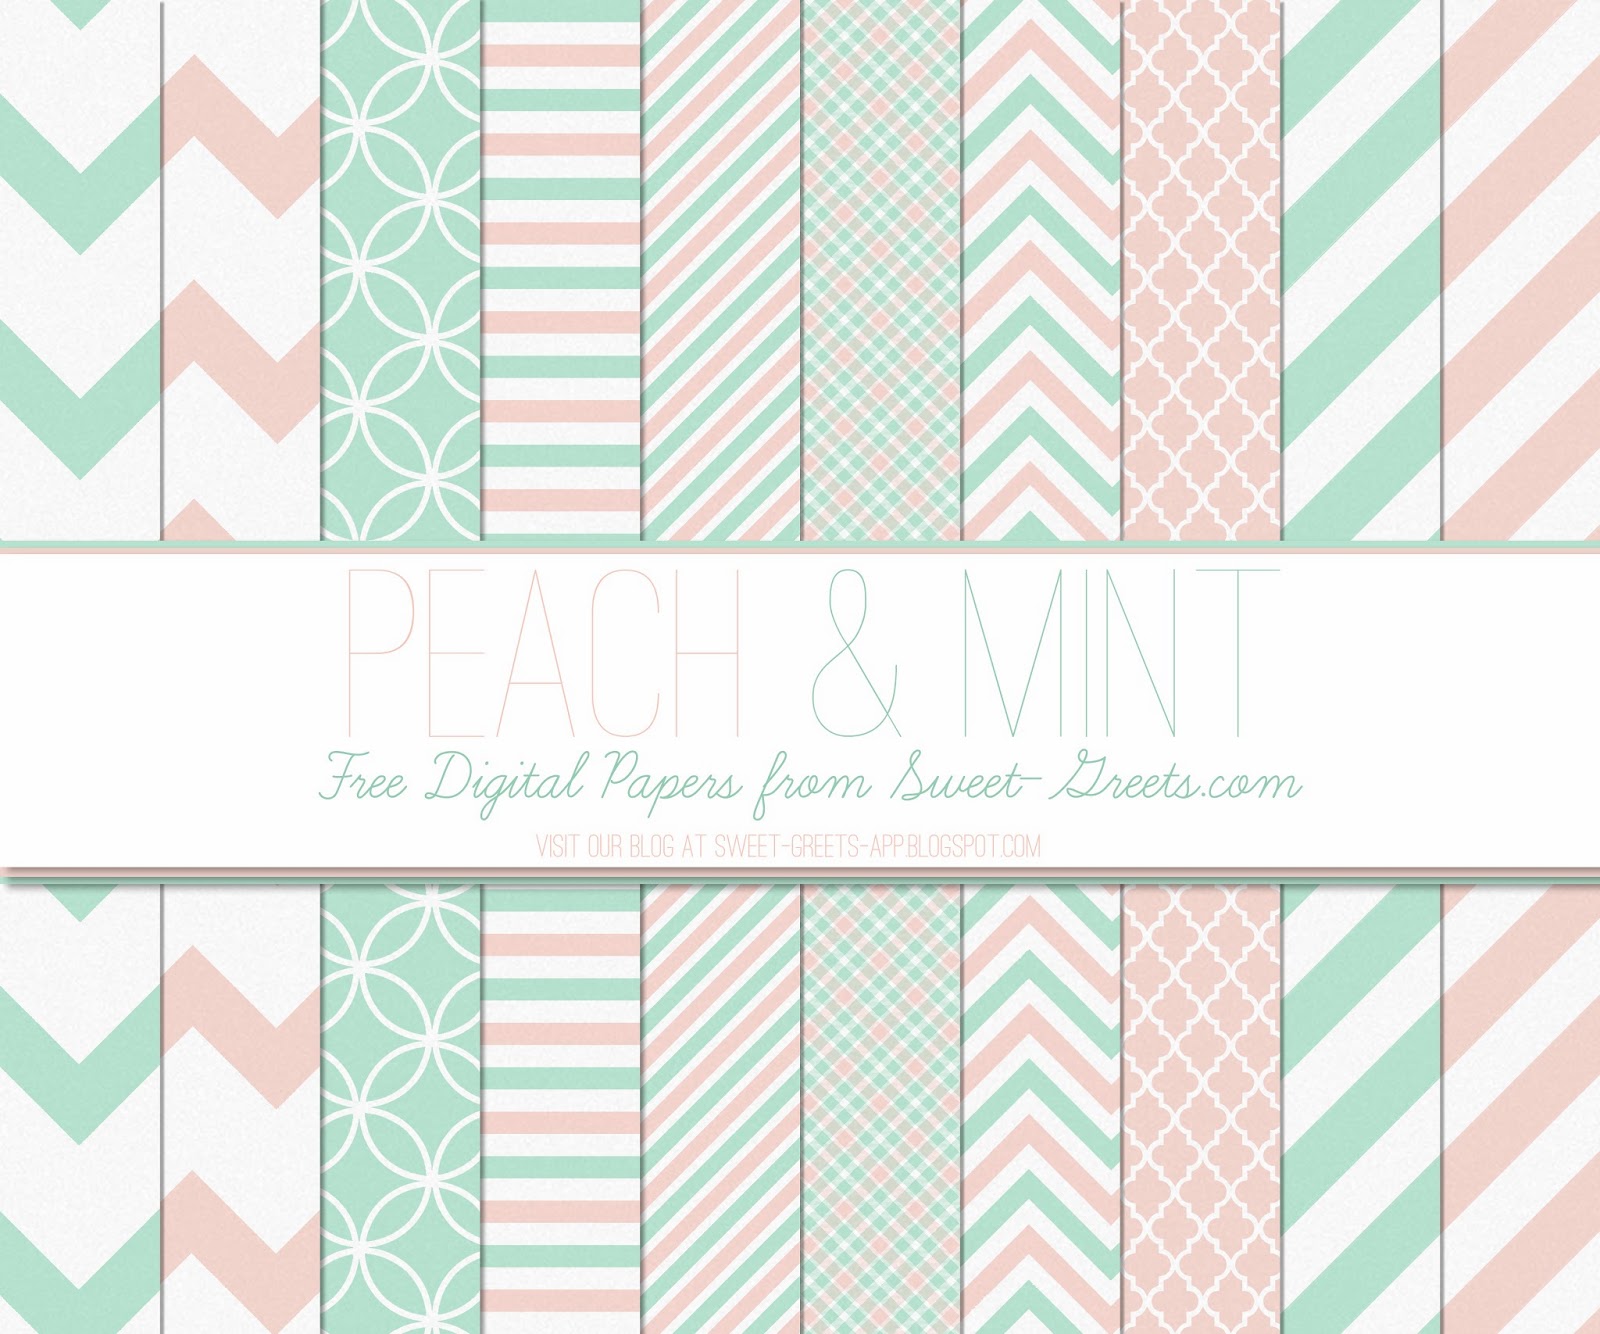 Free Digital Papers: Peach and Mint